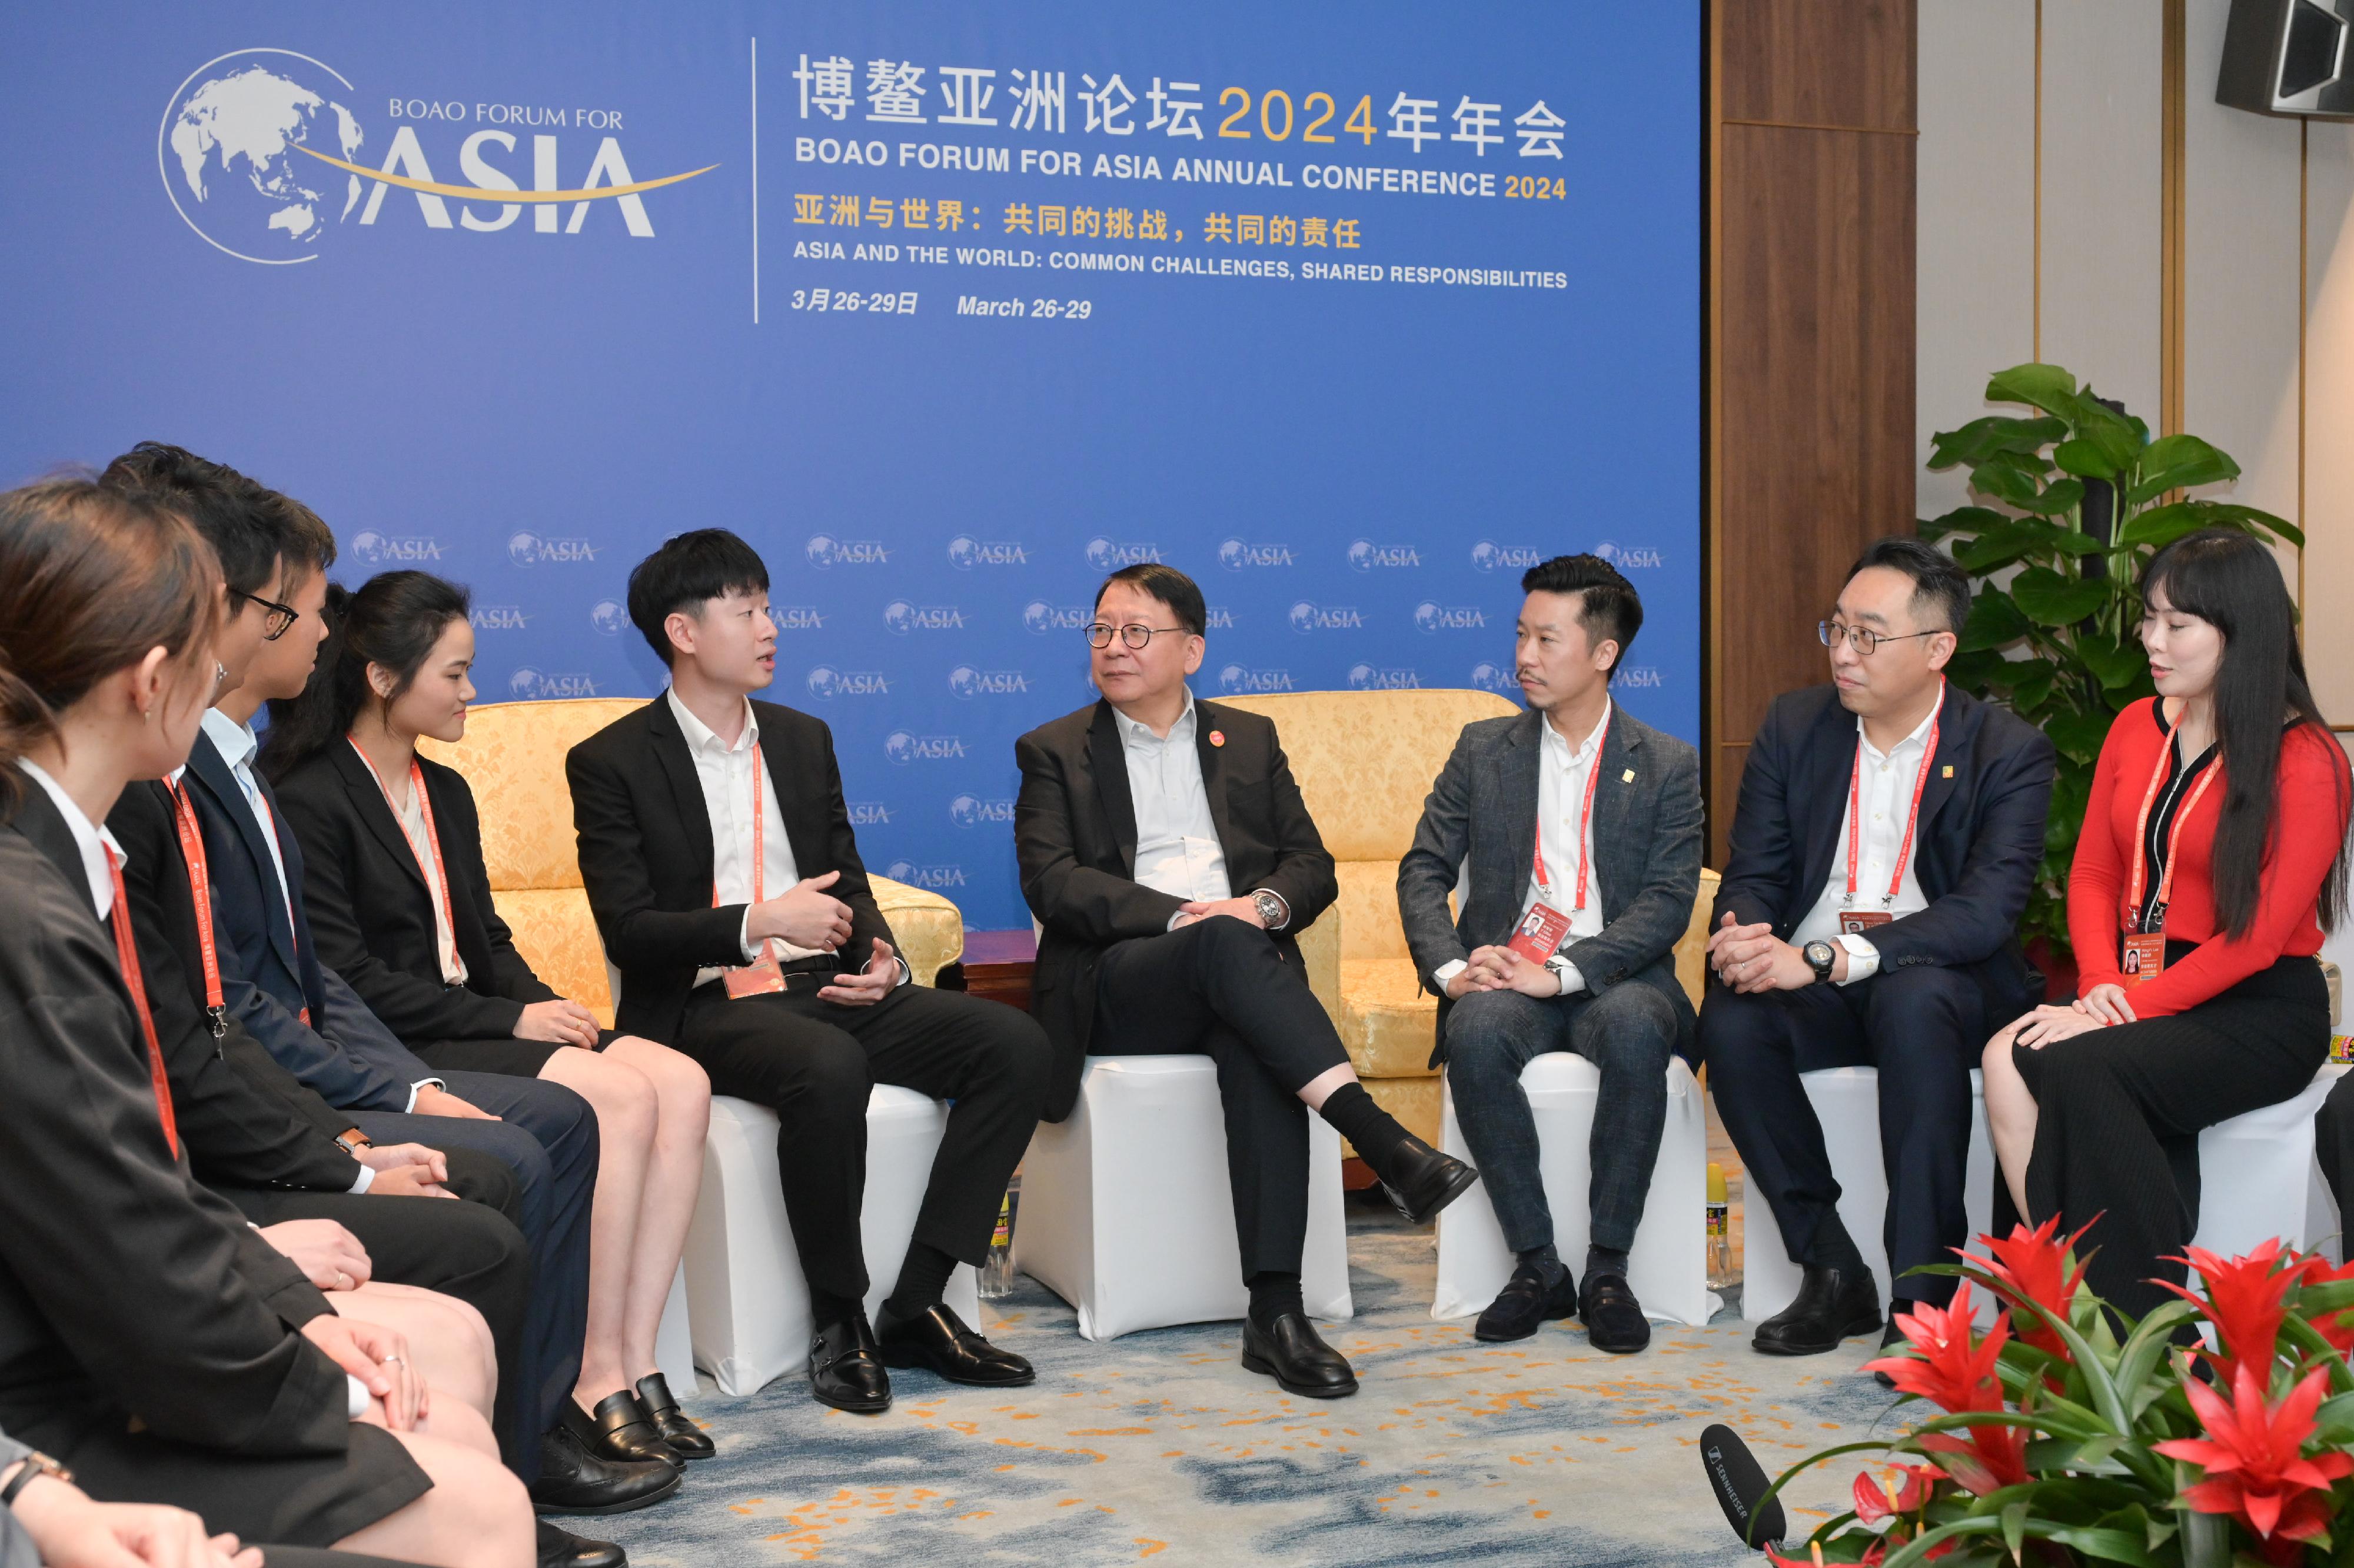 The Chief Secretary for Administration, Mr Chan Kwok-ki, met with the Hong Kong youth serving as volunteers at the Boao Forum for Asia Annual Conference 2024 in Hainan today (March 27). Photo shows Mr Chan (fourth right) interacting with the Chairman of the Y. Elites Association, Mr Lawrence Lam (third right); the Executive Deputy Chairman of the Y. Elites Association, Mr Jason Wong (second right) and the Hong Kong youth volunteers, to understand their work and views.